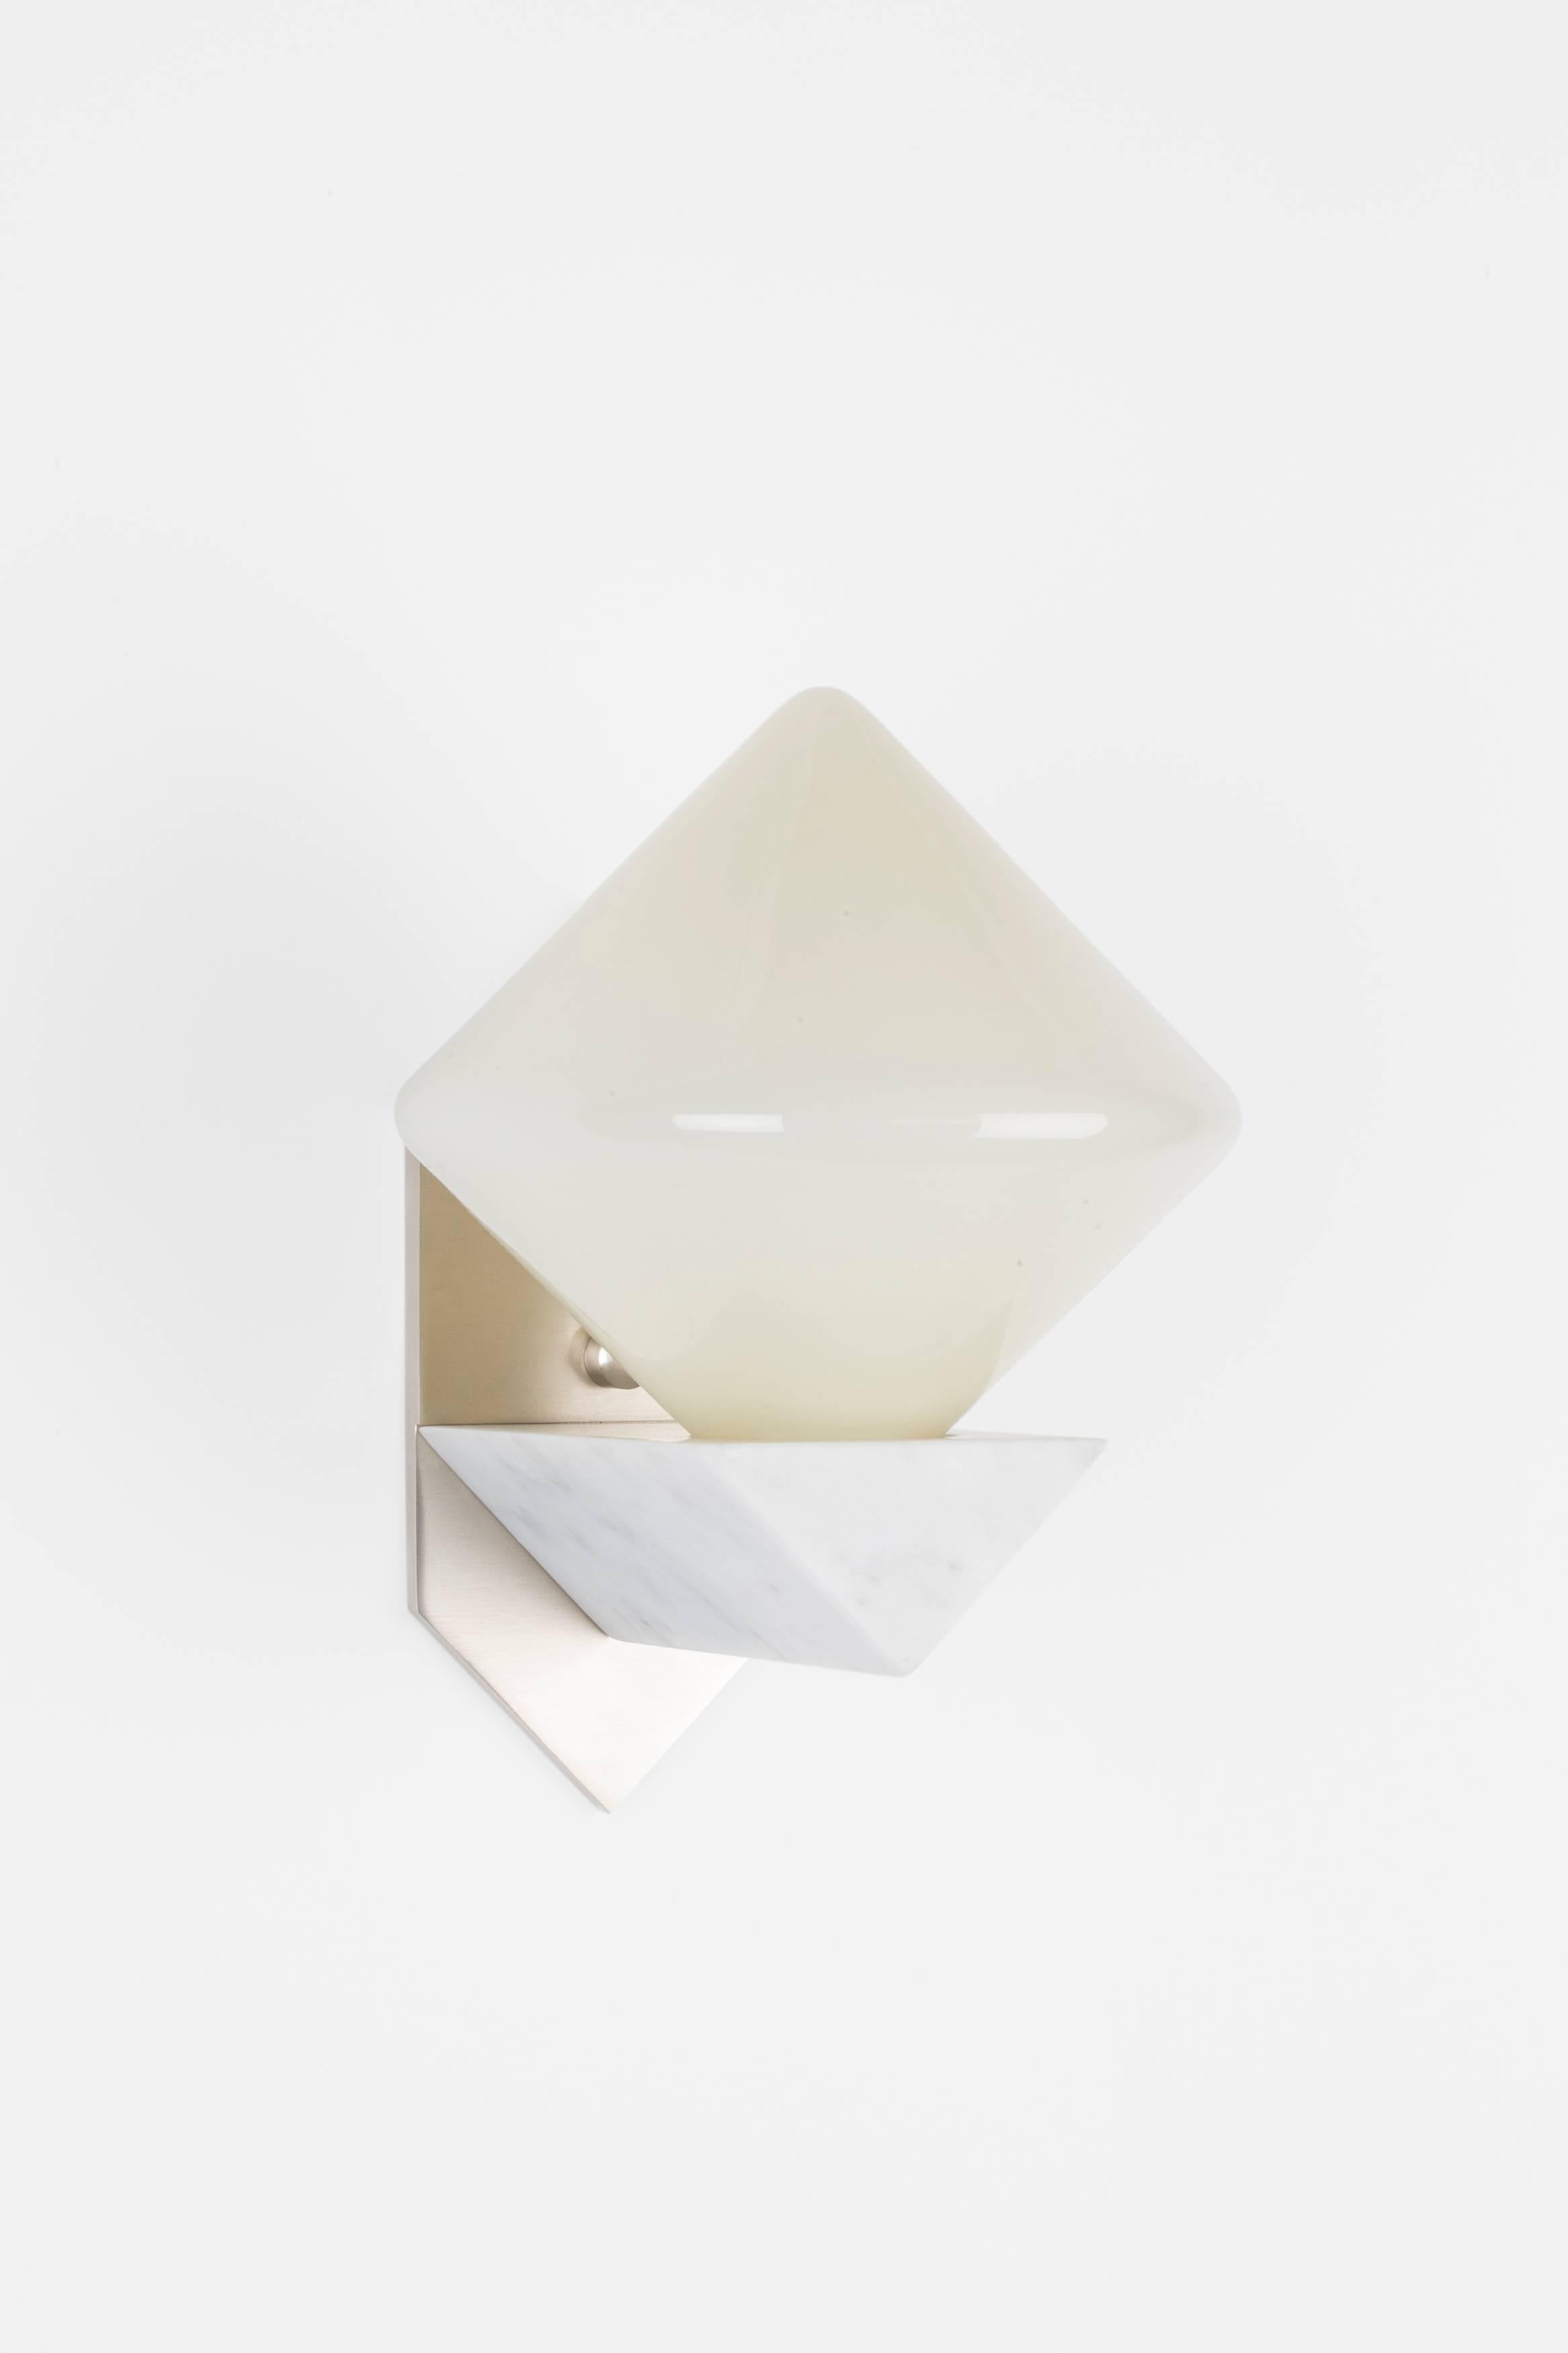 Originally inspired by Victorian balancing toys, Themis combines handblown glass diffusers with an elegant marble and brass bracket to provide a soft glow. The forms are derived from triangular forms manipulated through rotation, mirroring, and